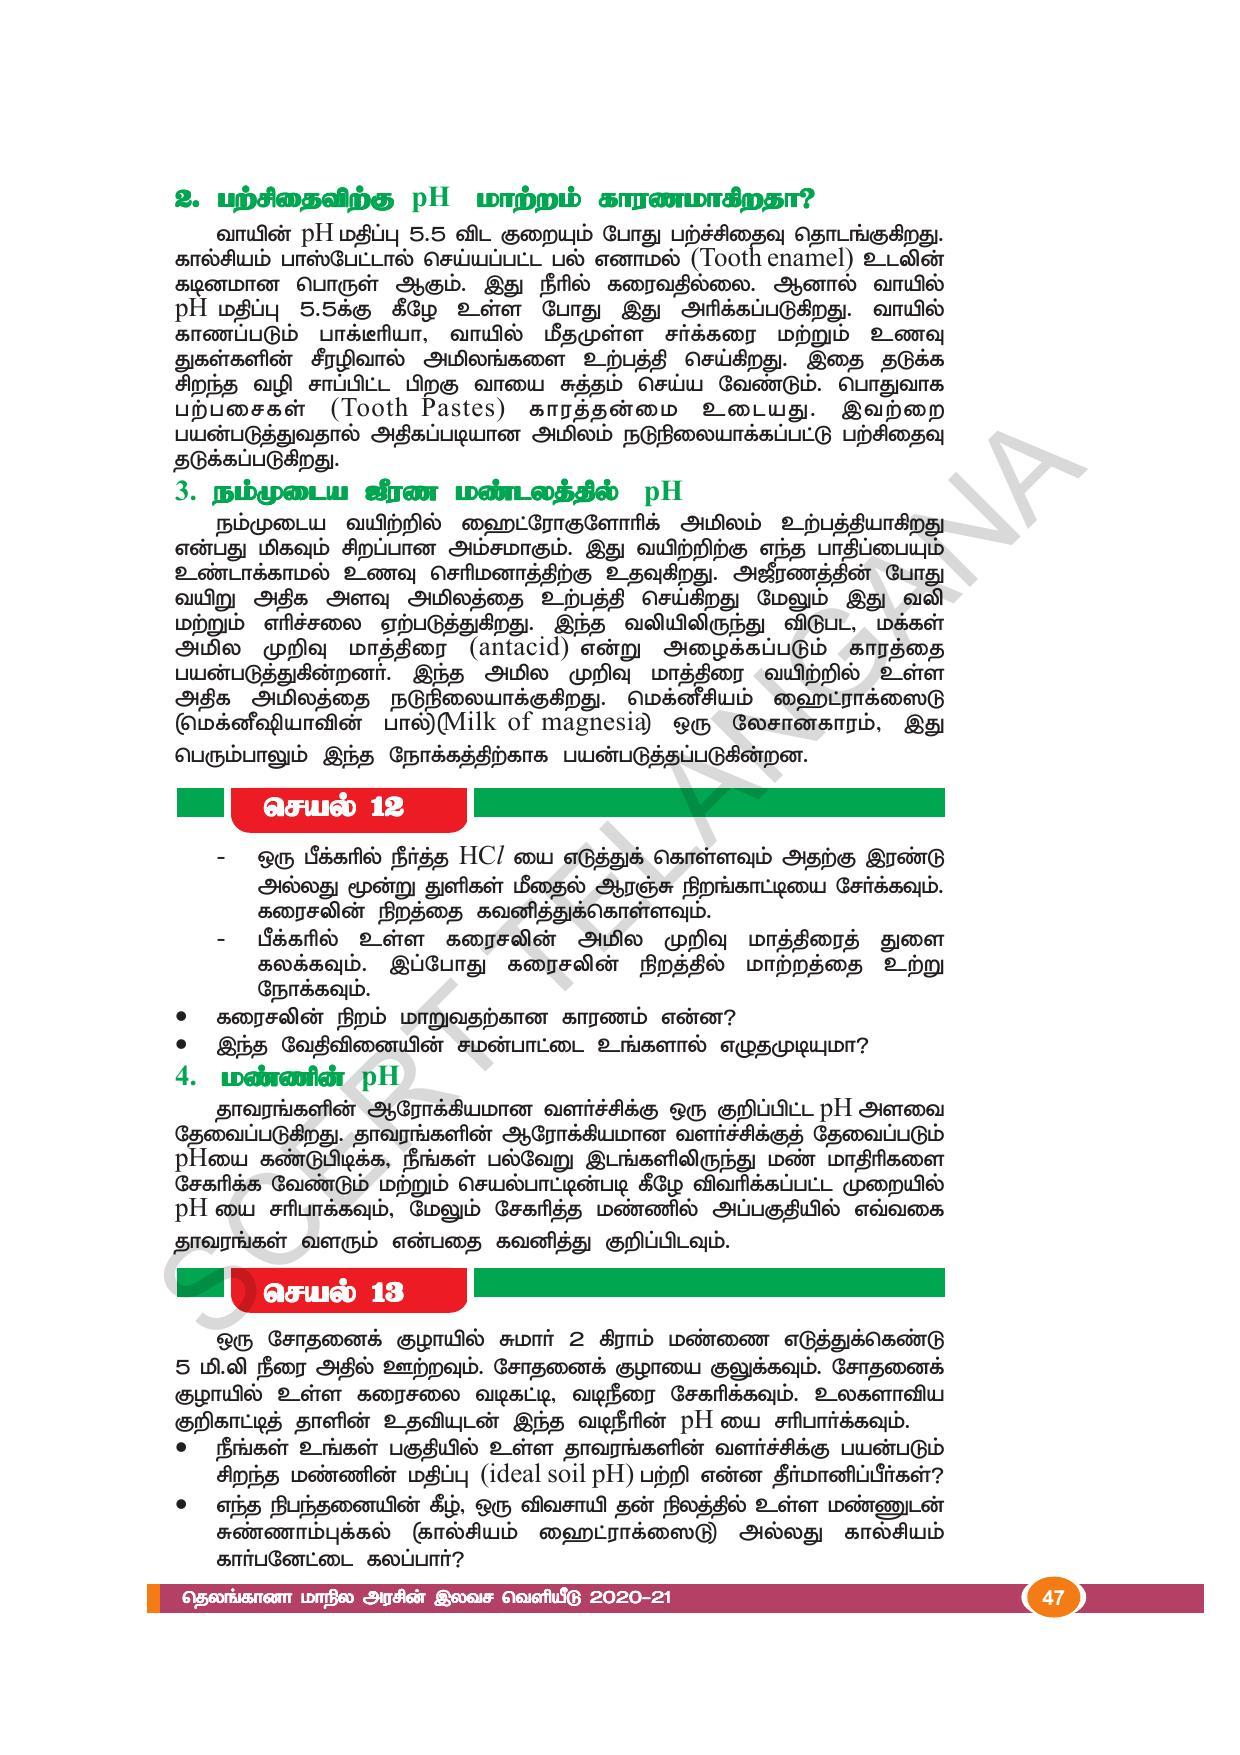 TS SCERT Class 10 Physical Science(Tamil Medium) Text Book - Page 59